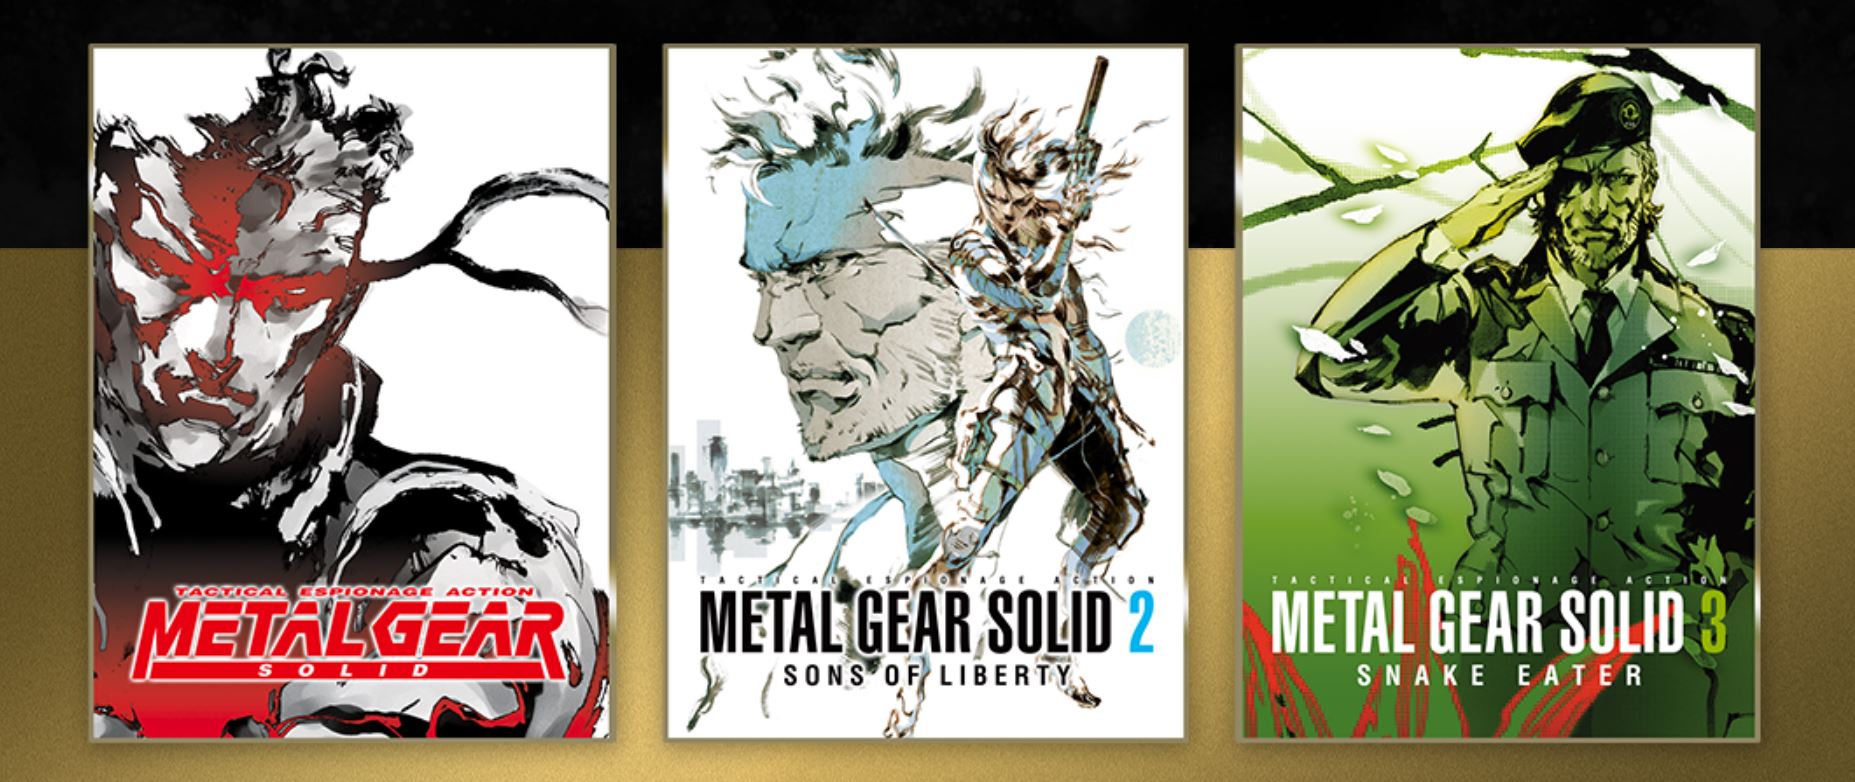 Metal Gear Solid: Master Collection Vol.1 PlayStation 5 - Best Buy